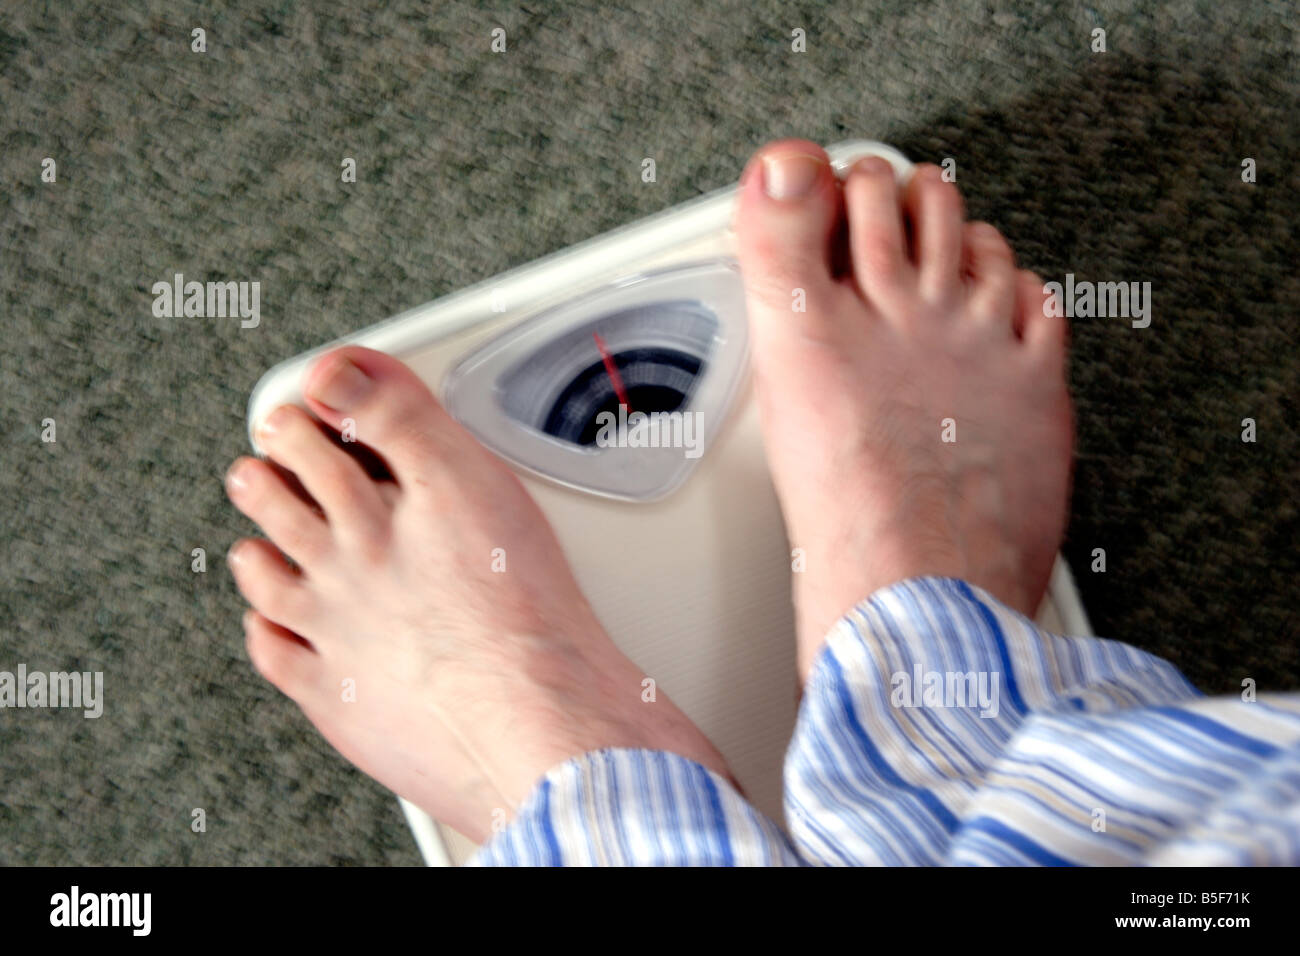 https://c8.alamy.com/comp/B5F71K/person-weighing-themselves-on-scales-close-up-B5F71K.jpg